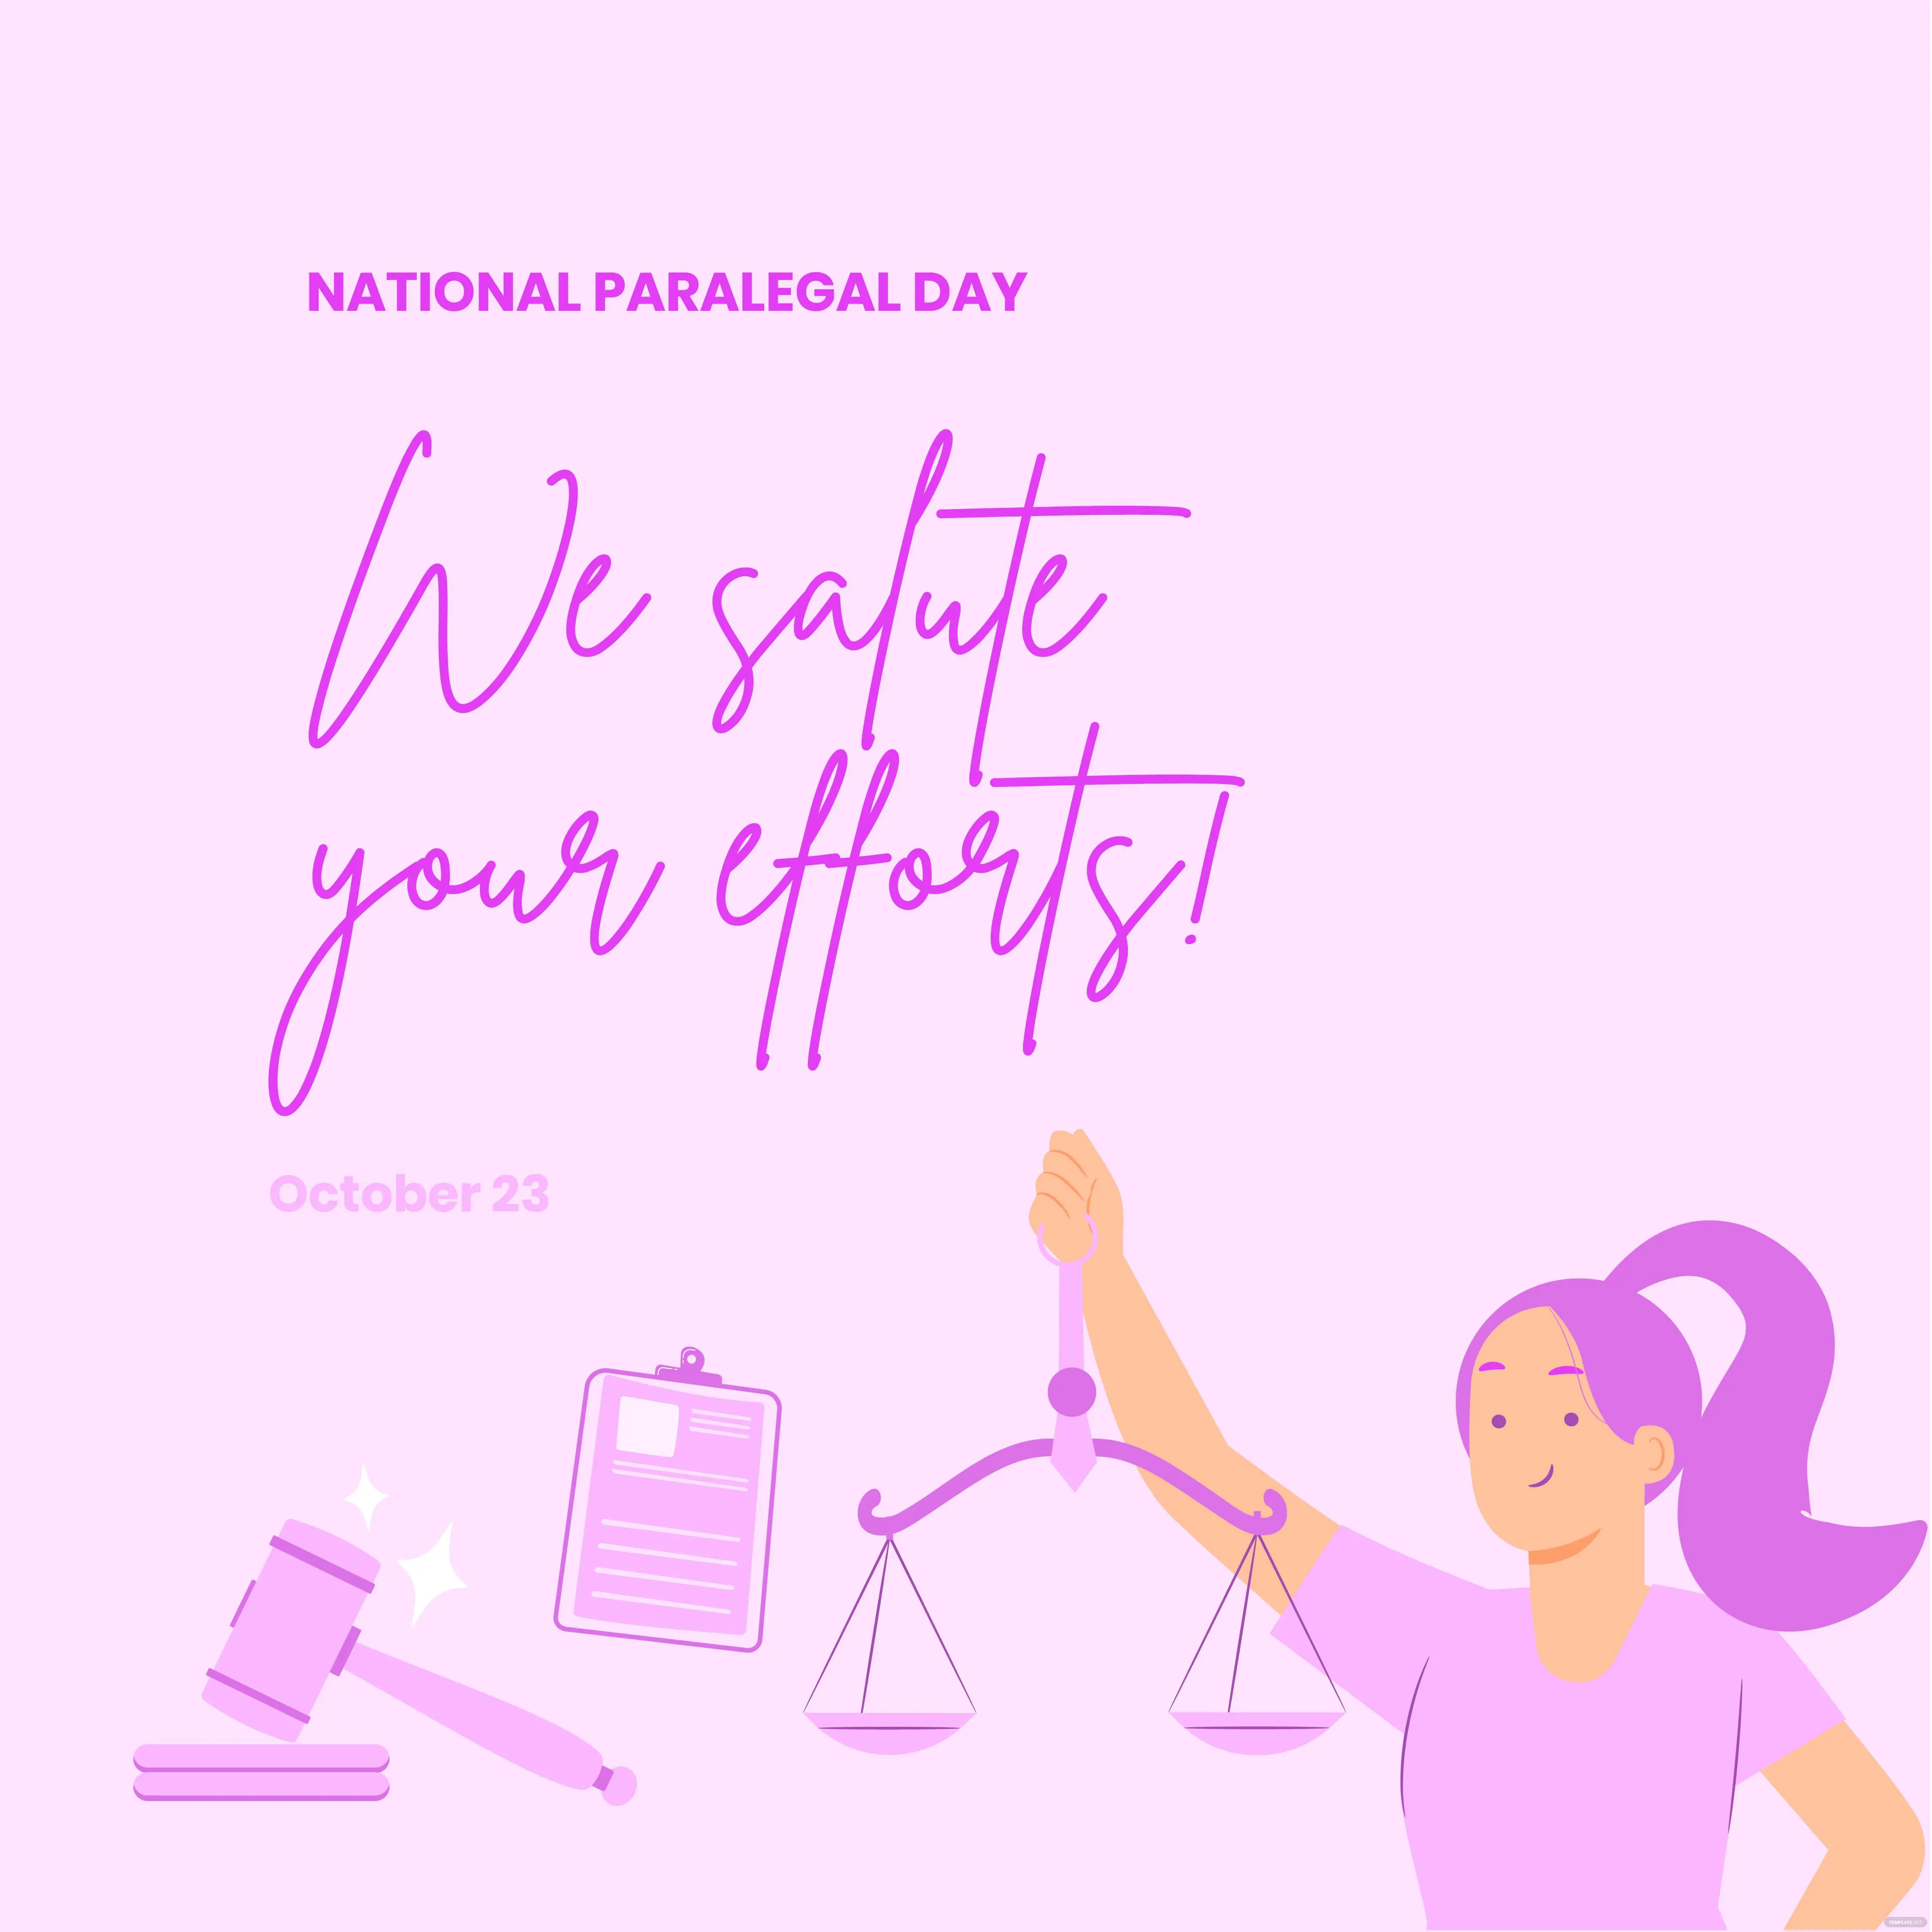 national paralegal day fb post ideas examples